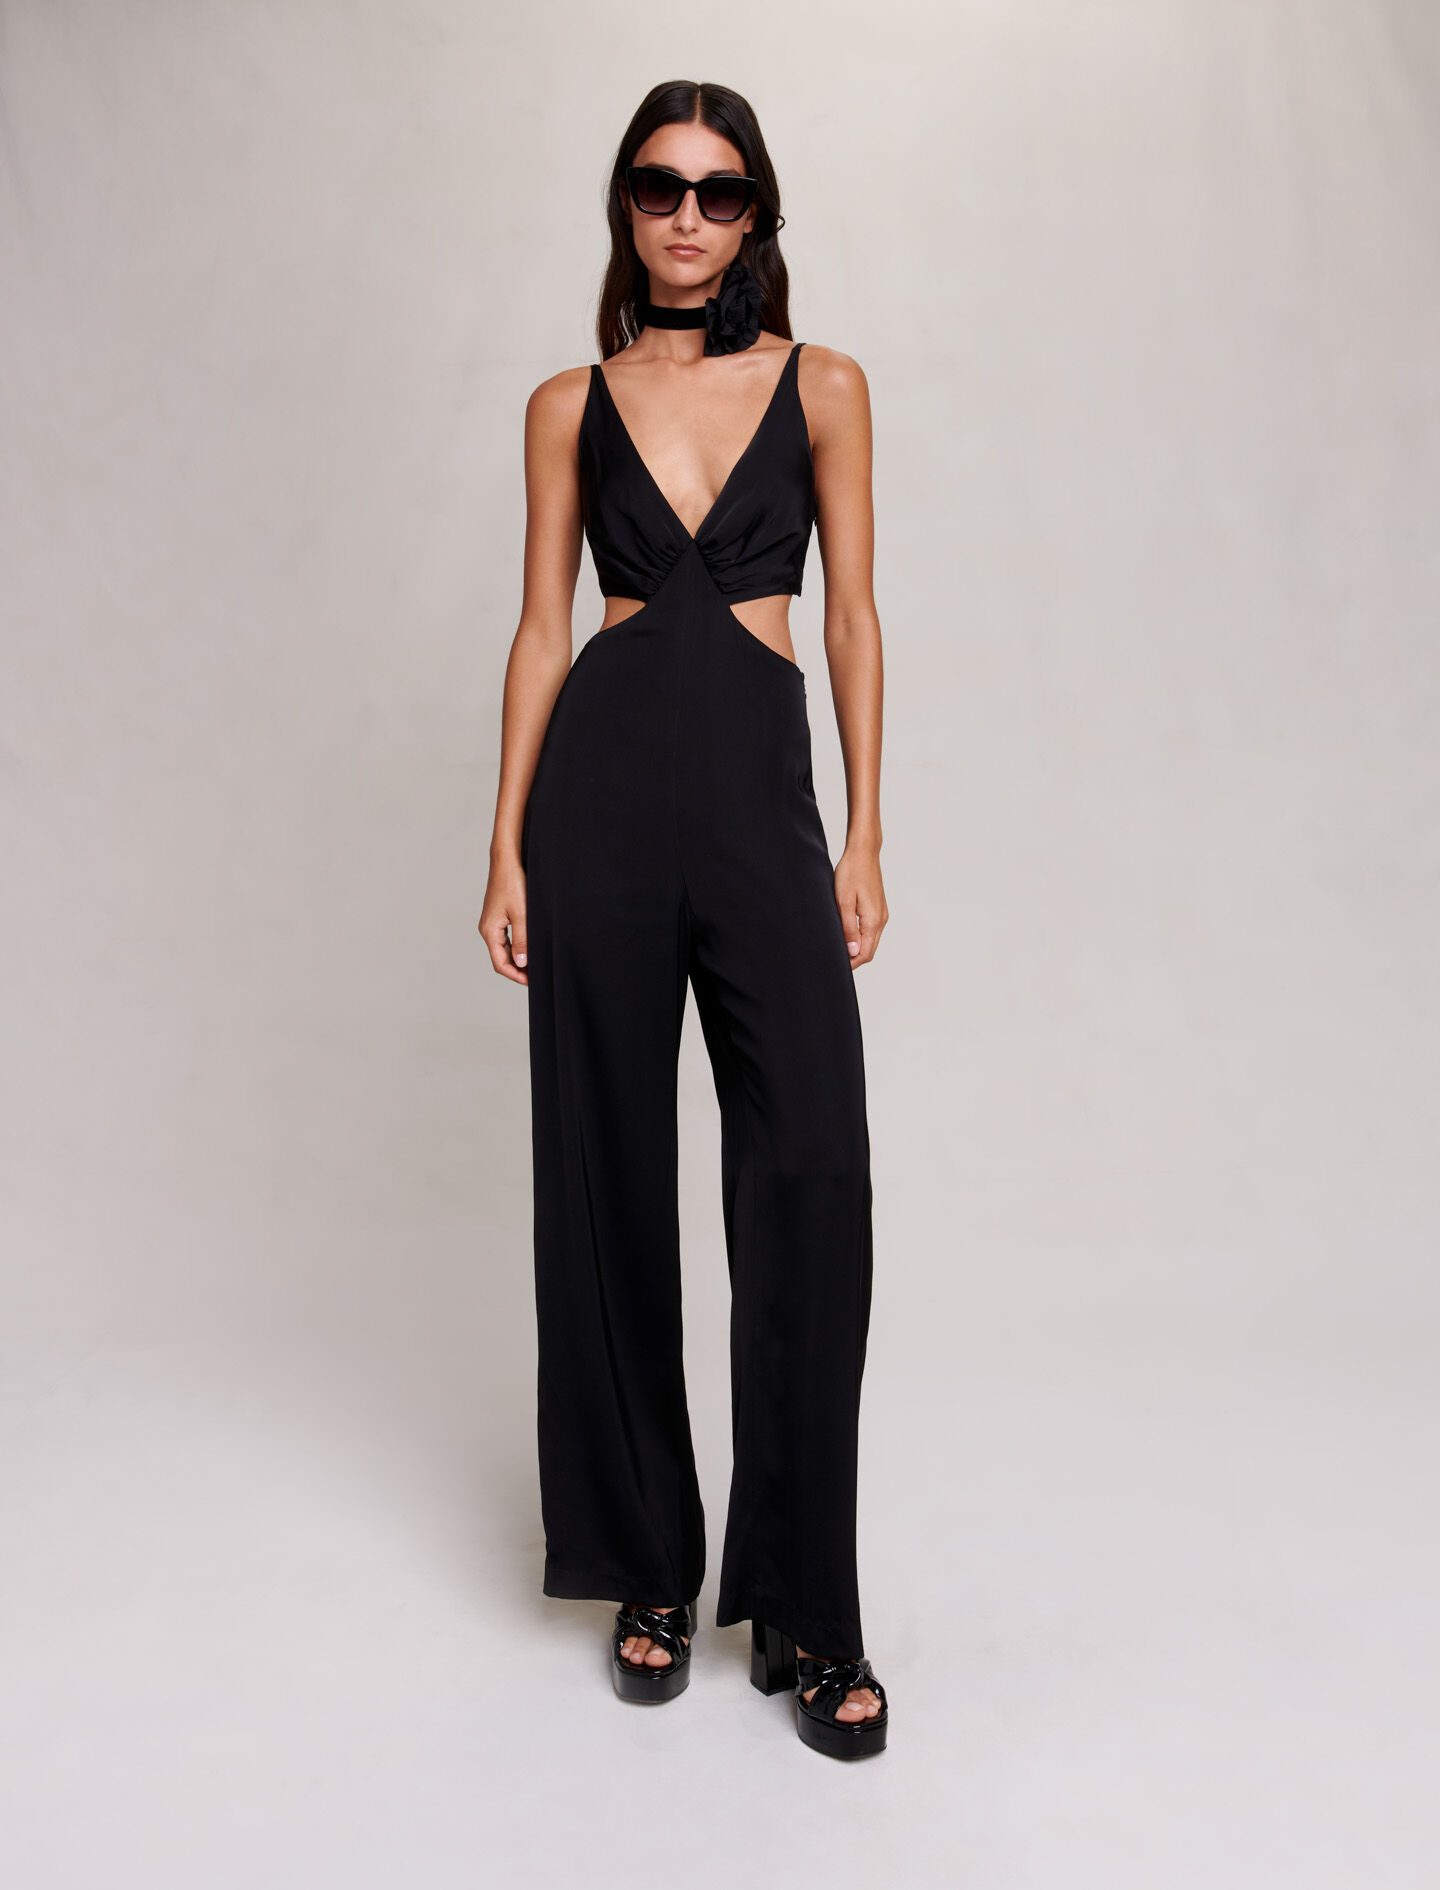 Wholesale Sleeveless Backless Dungarees Black Strap Casual Suspender Trousers  Playsuit Pockets Belt Zippers Cargo Pants Jumpsuit Women From malibabacom